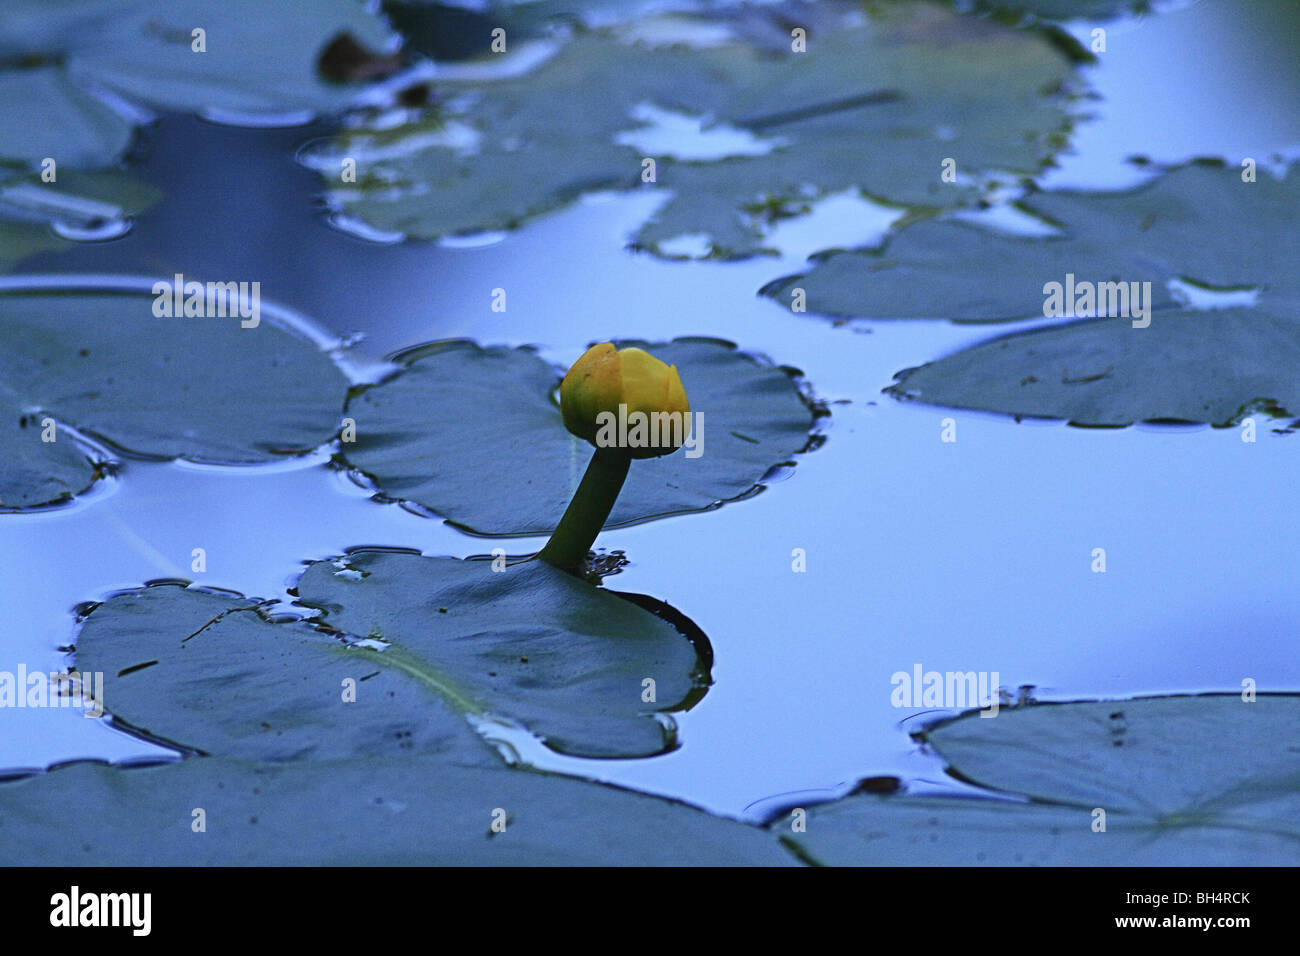 Lily pads covering pond in evening light at Hospital Lochan. Stock Photo